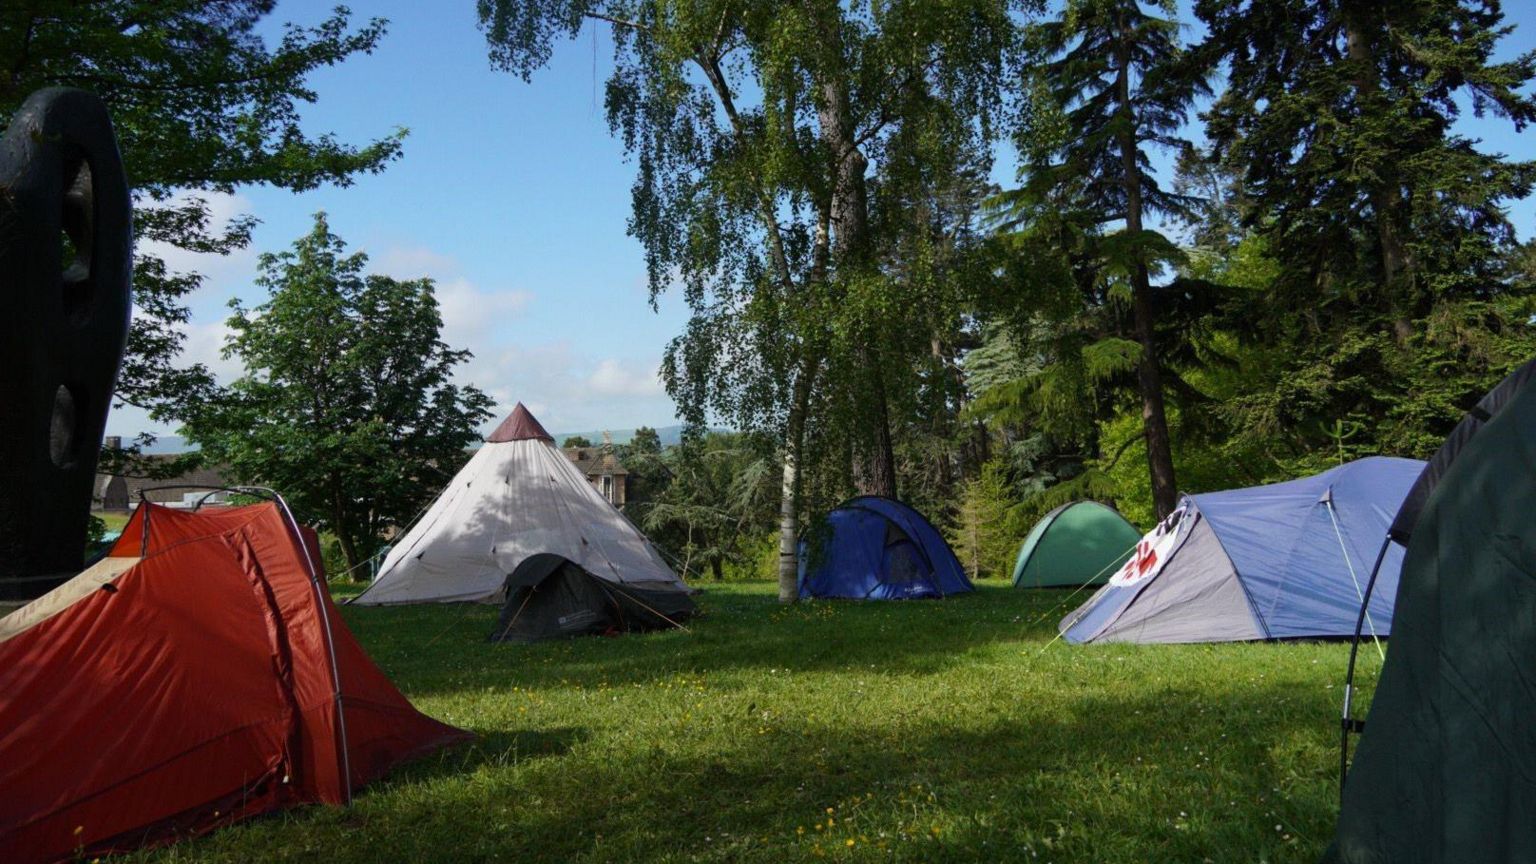 The encampment at the University of Exeter